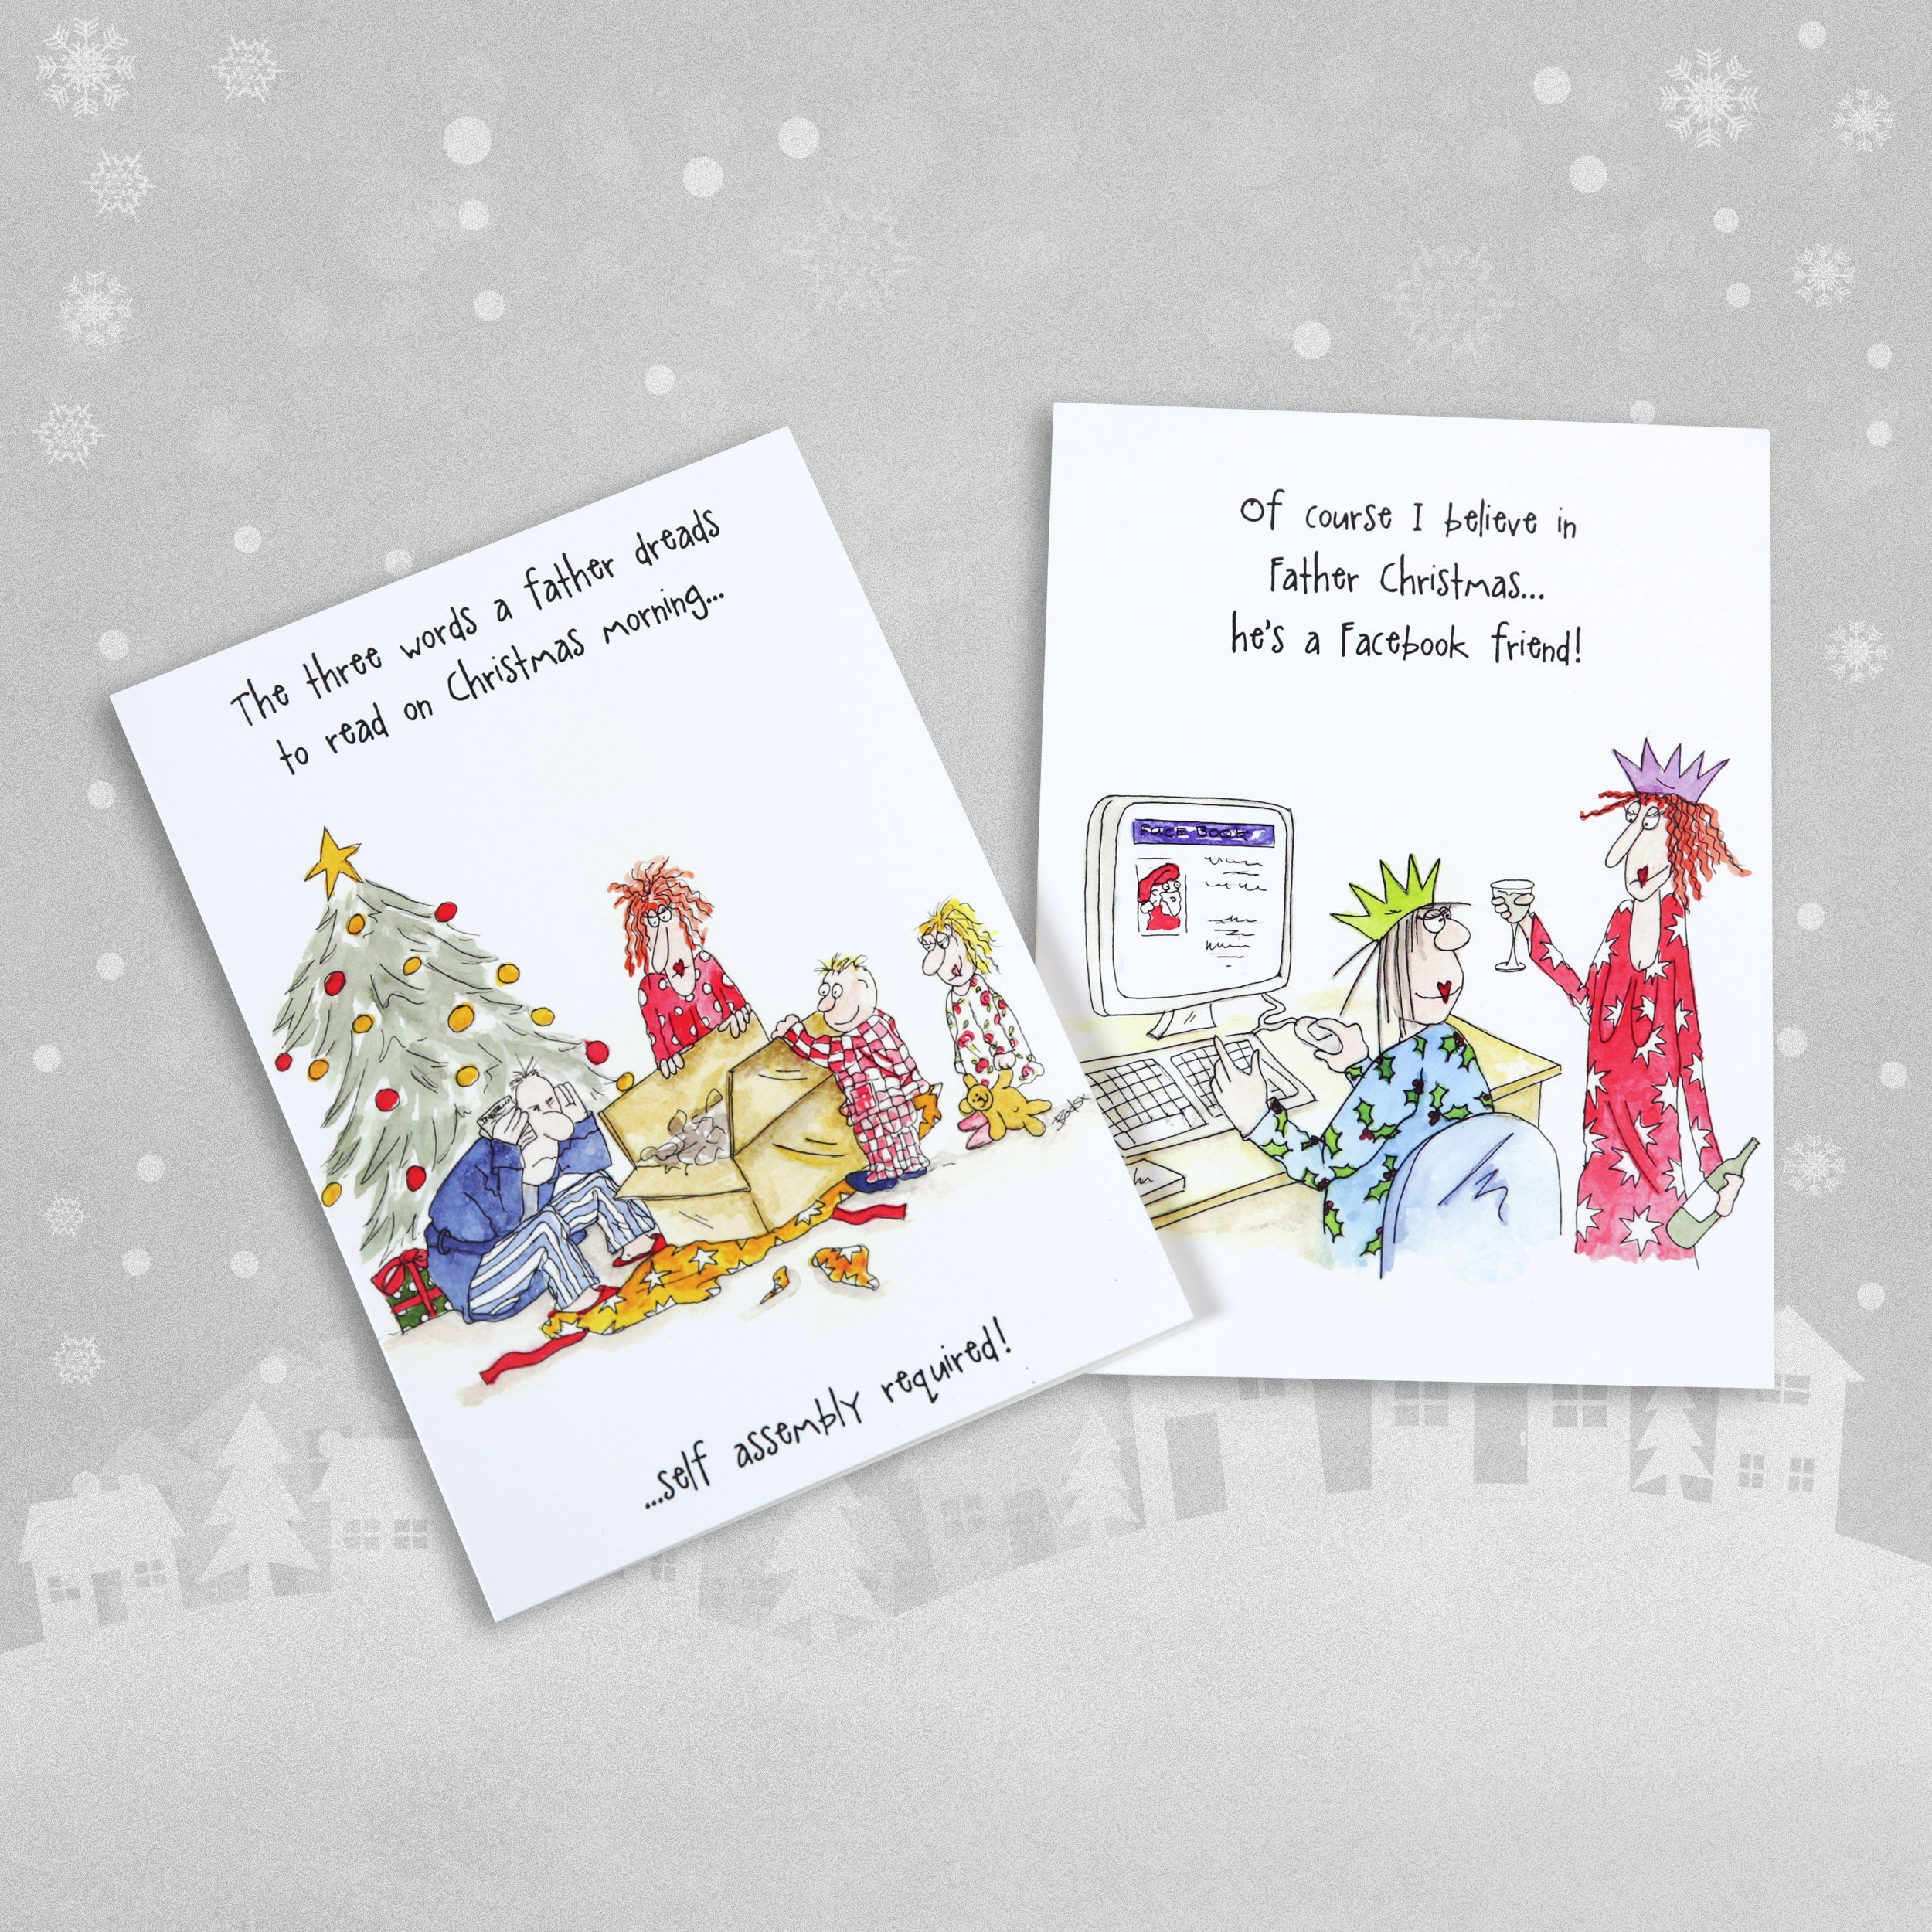 10 Humorous Christmas Cards - 'Father Christmas' and 'Self-assembly'